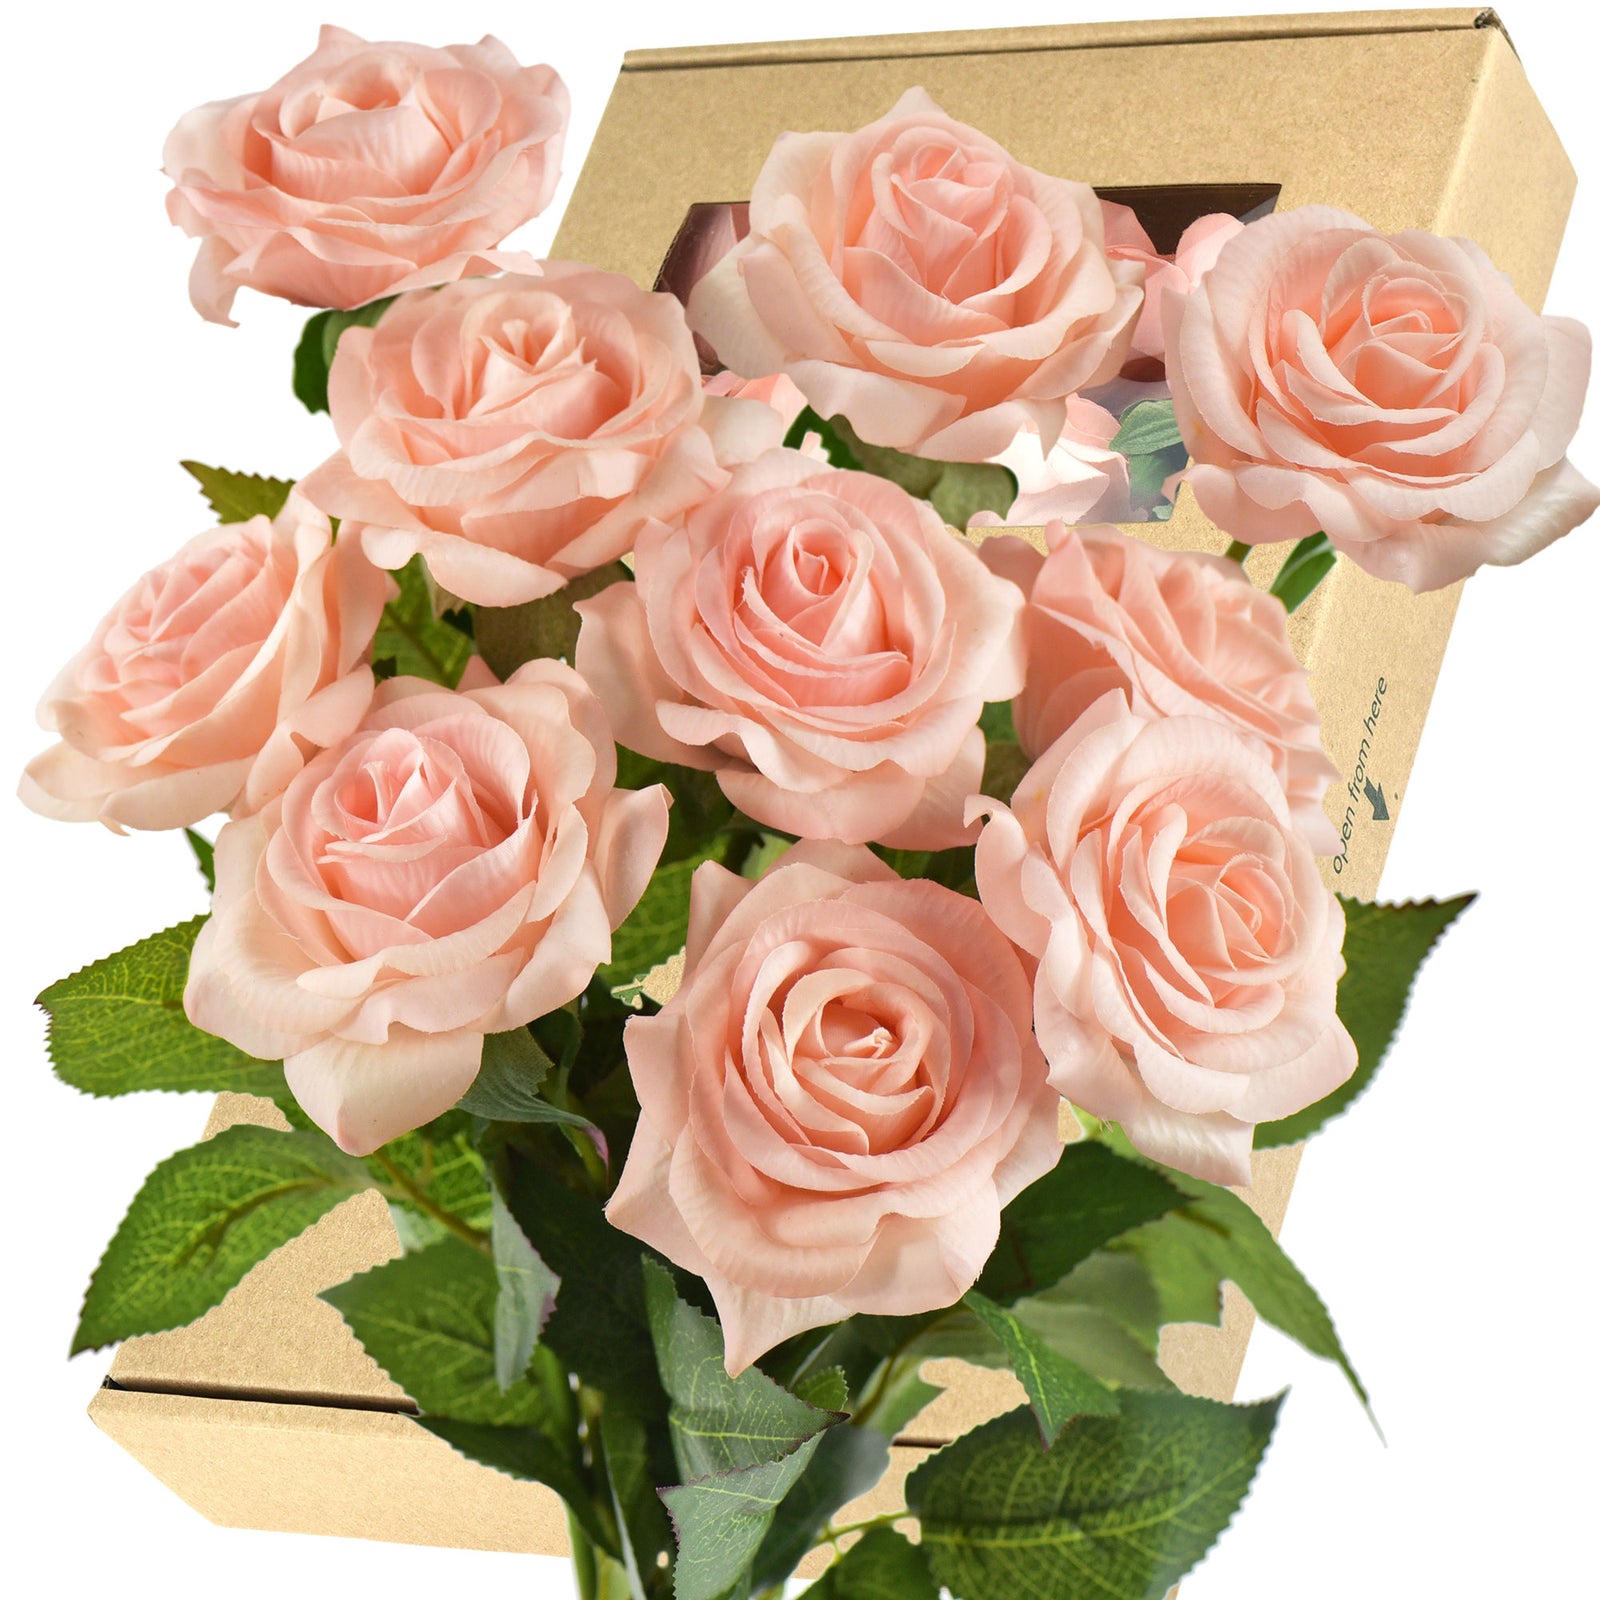 Peach Real Touch Silk Artificial Flowers ‘Petals Feel and Look like Fresh Roses 10 Stems